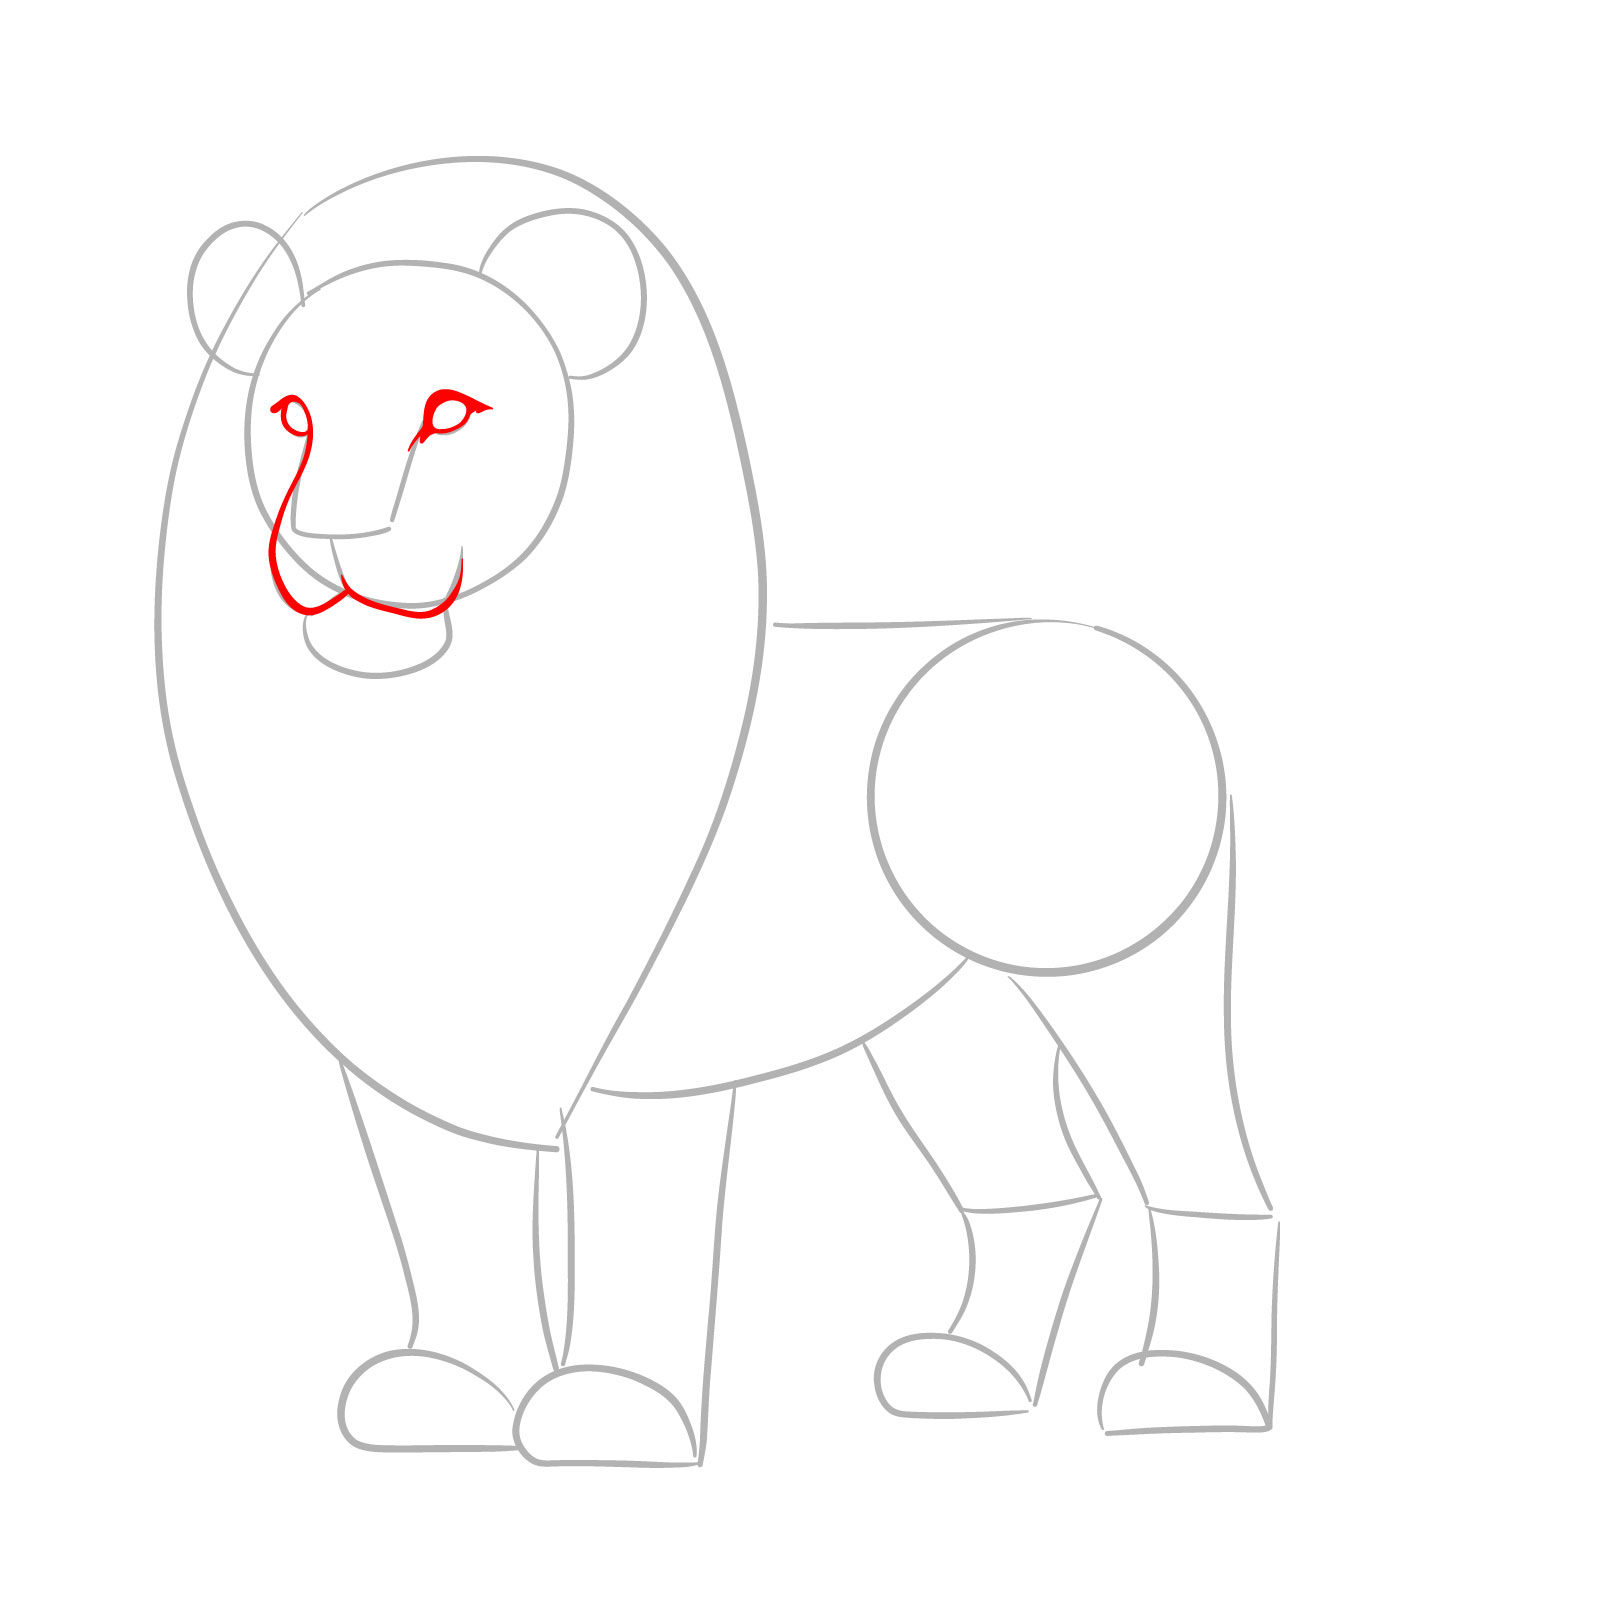 Detailing the eyes and muzzle of the lion - step 03